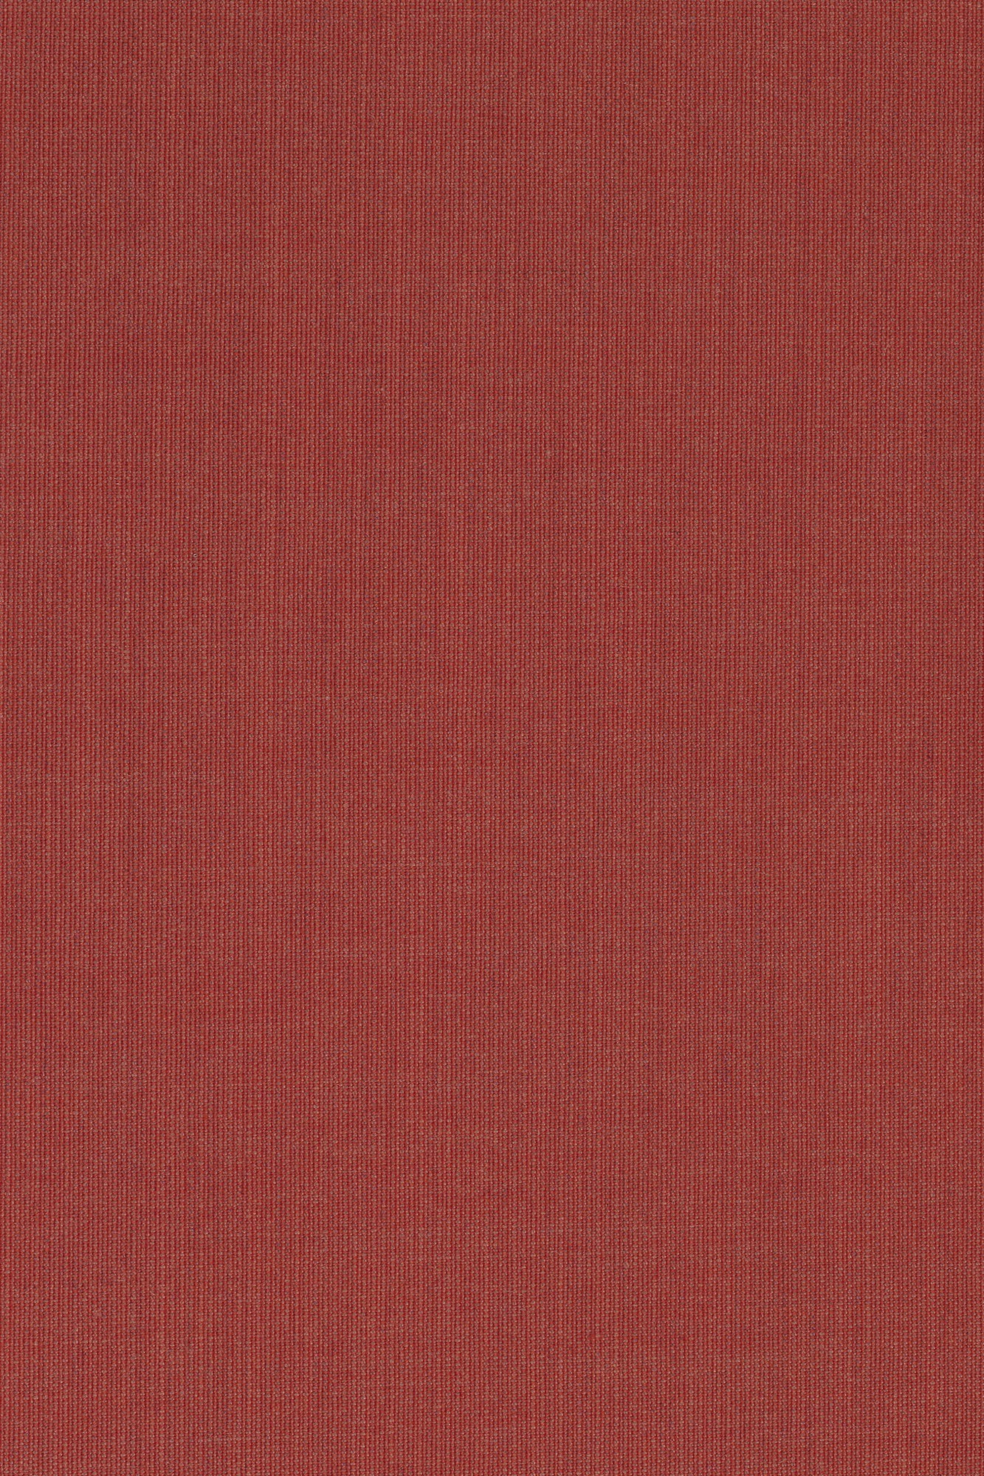 Fabric sample Canvas 2 644 red